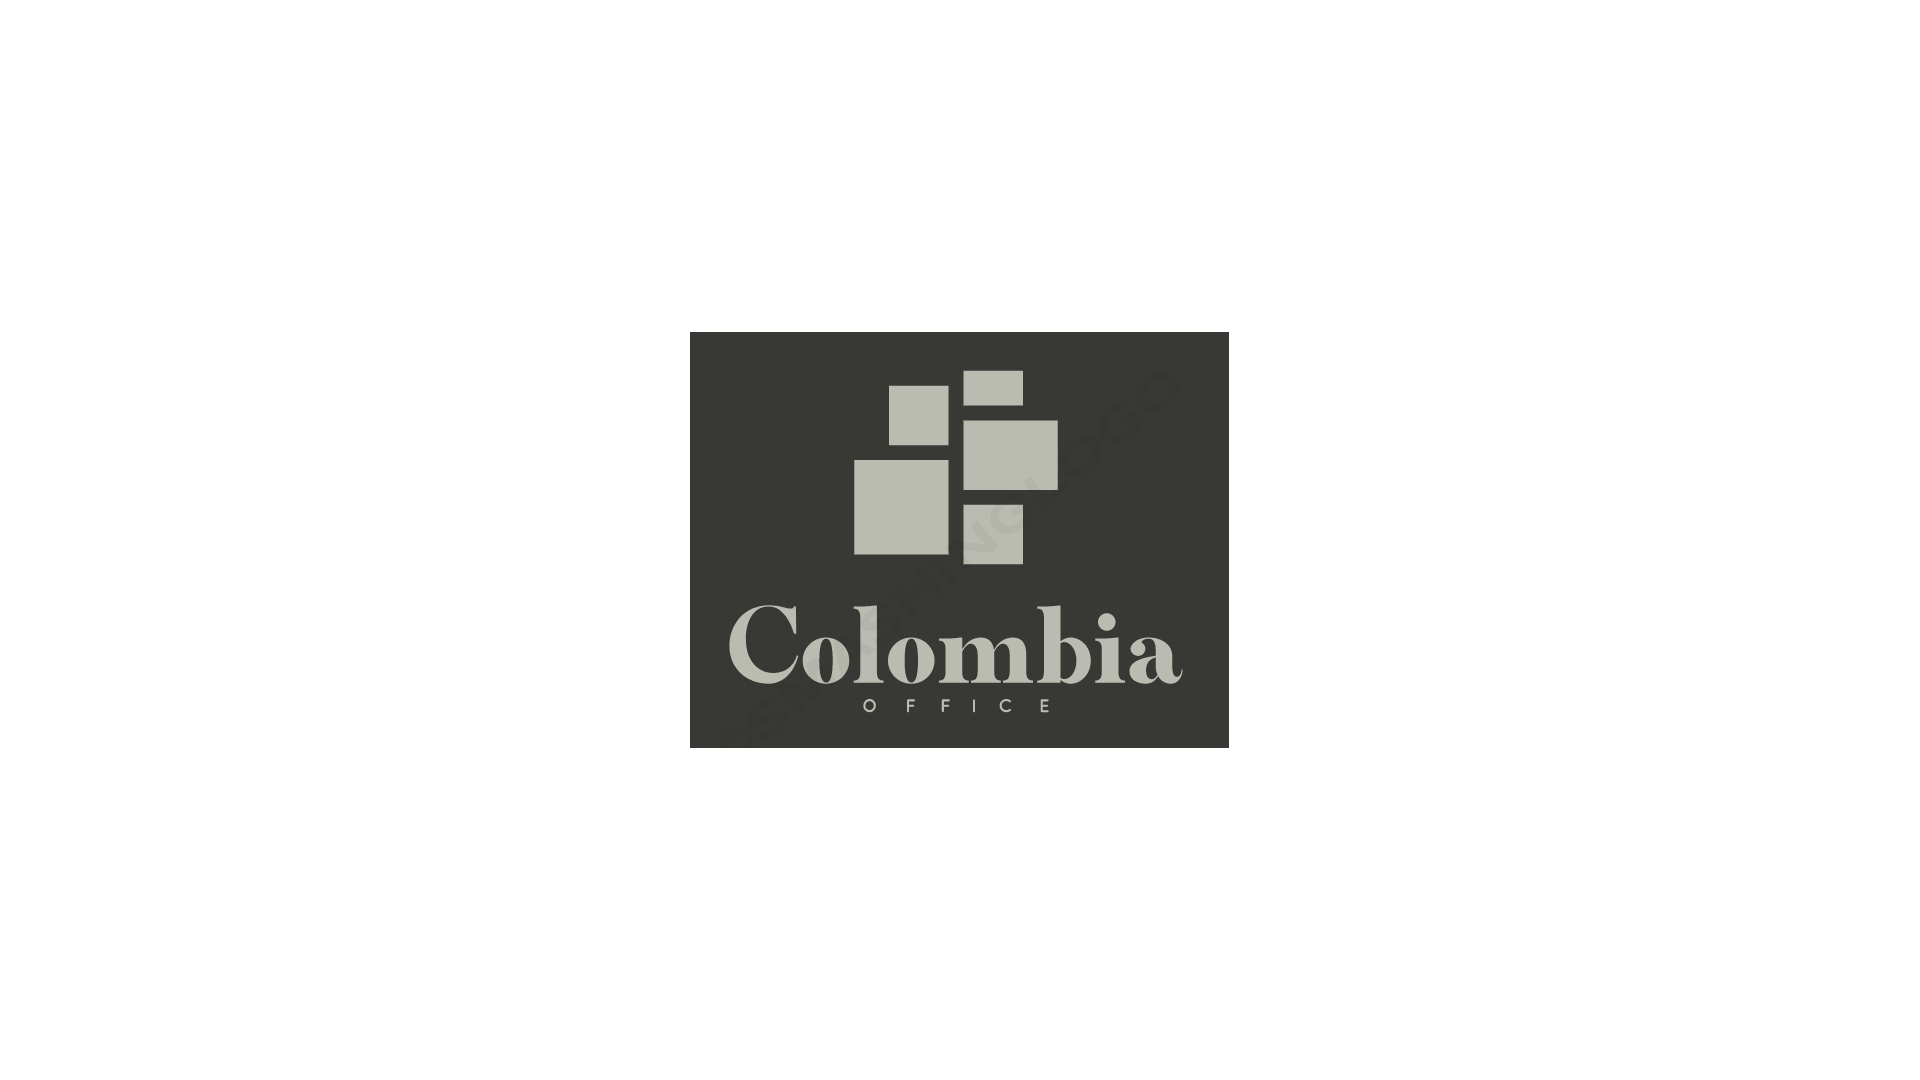 Colombia Office